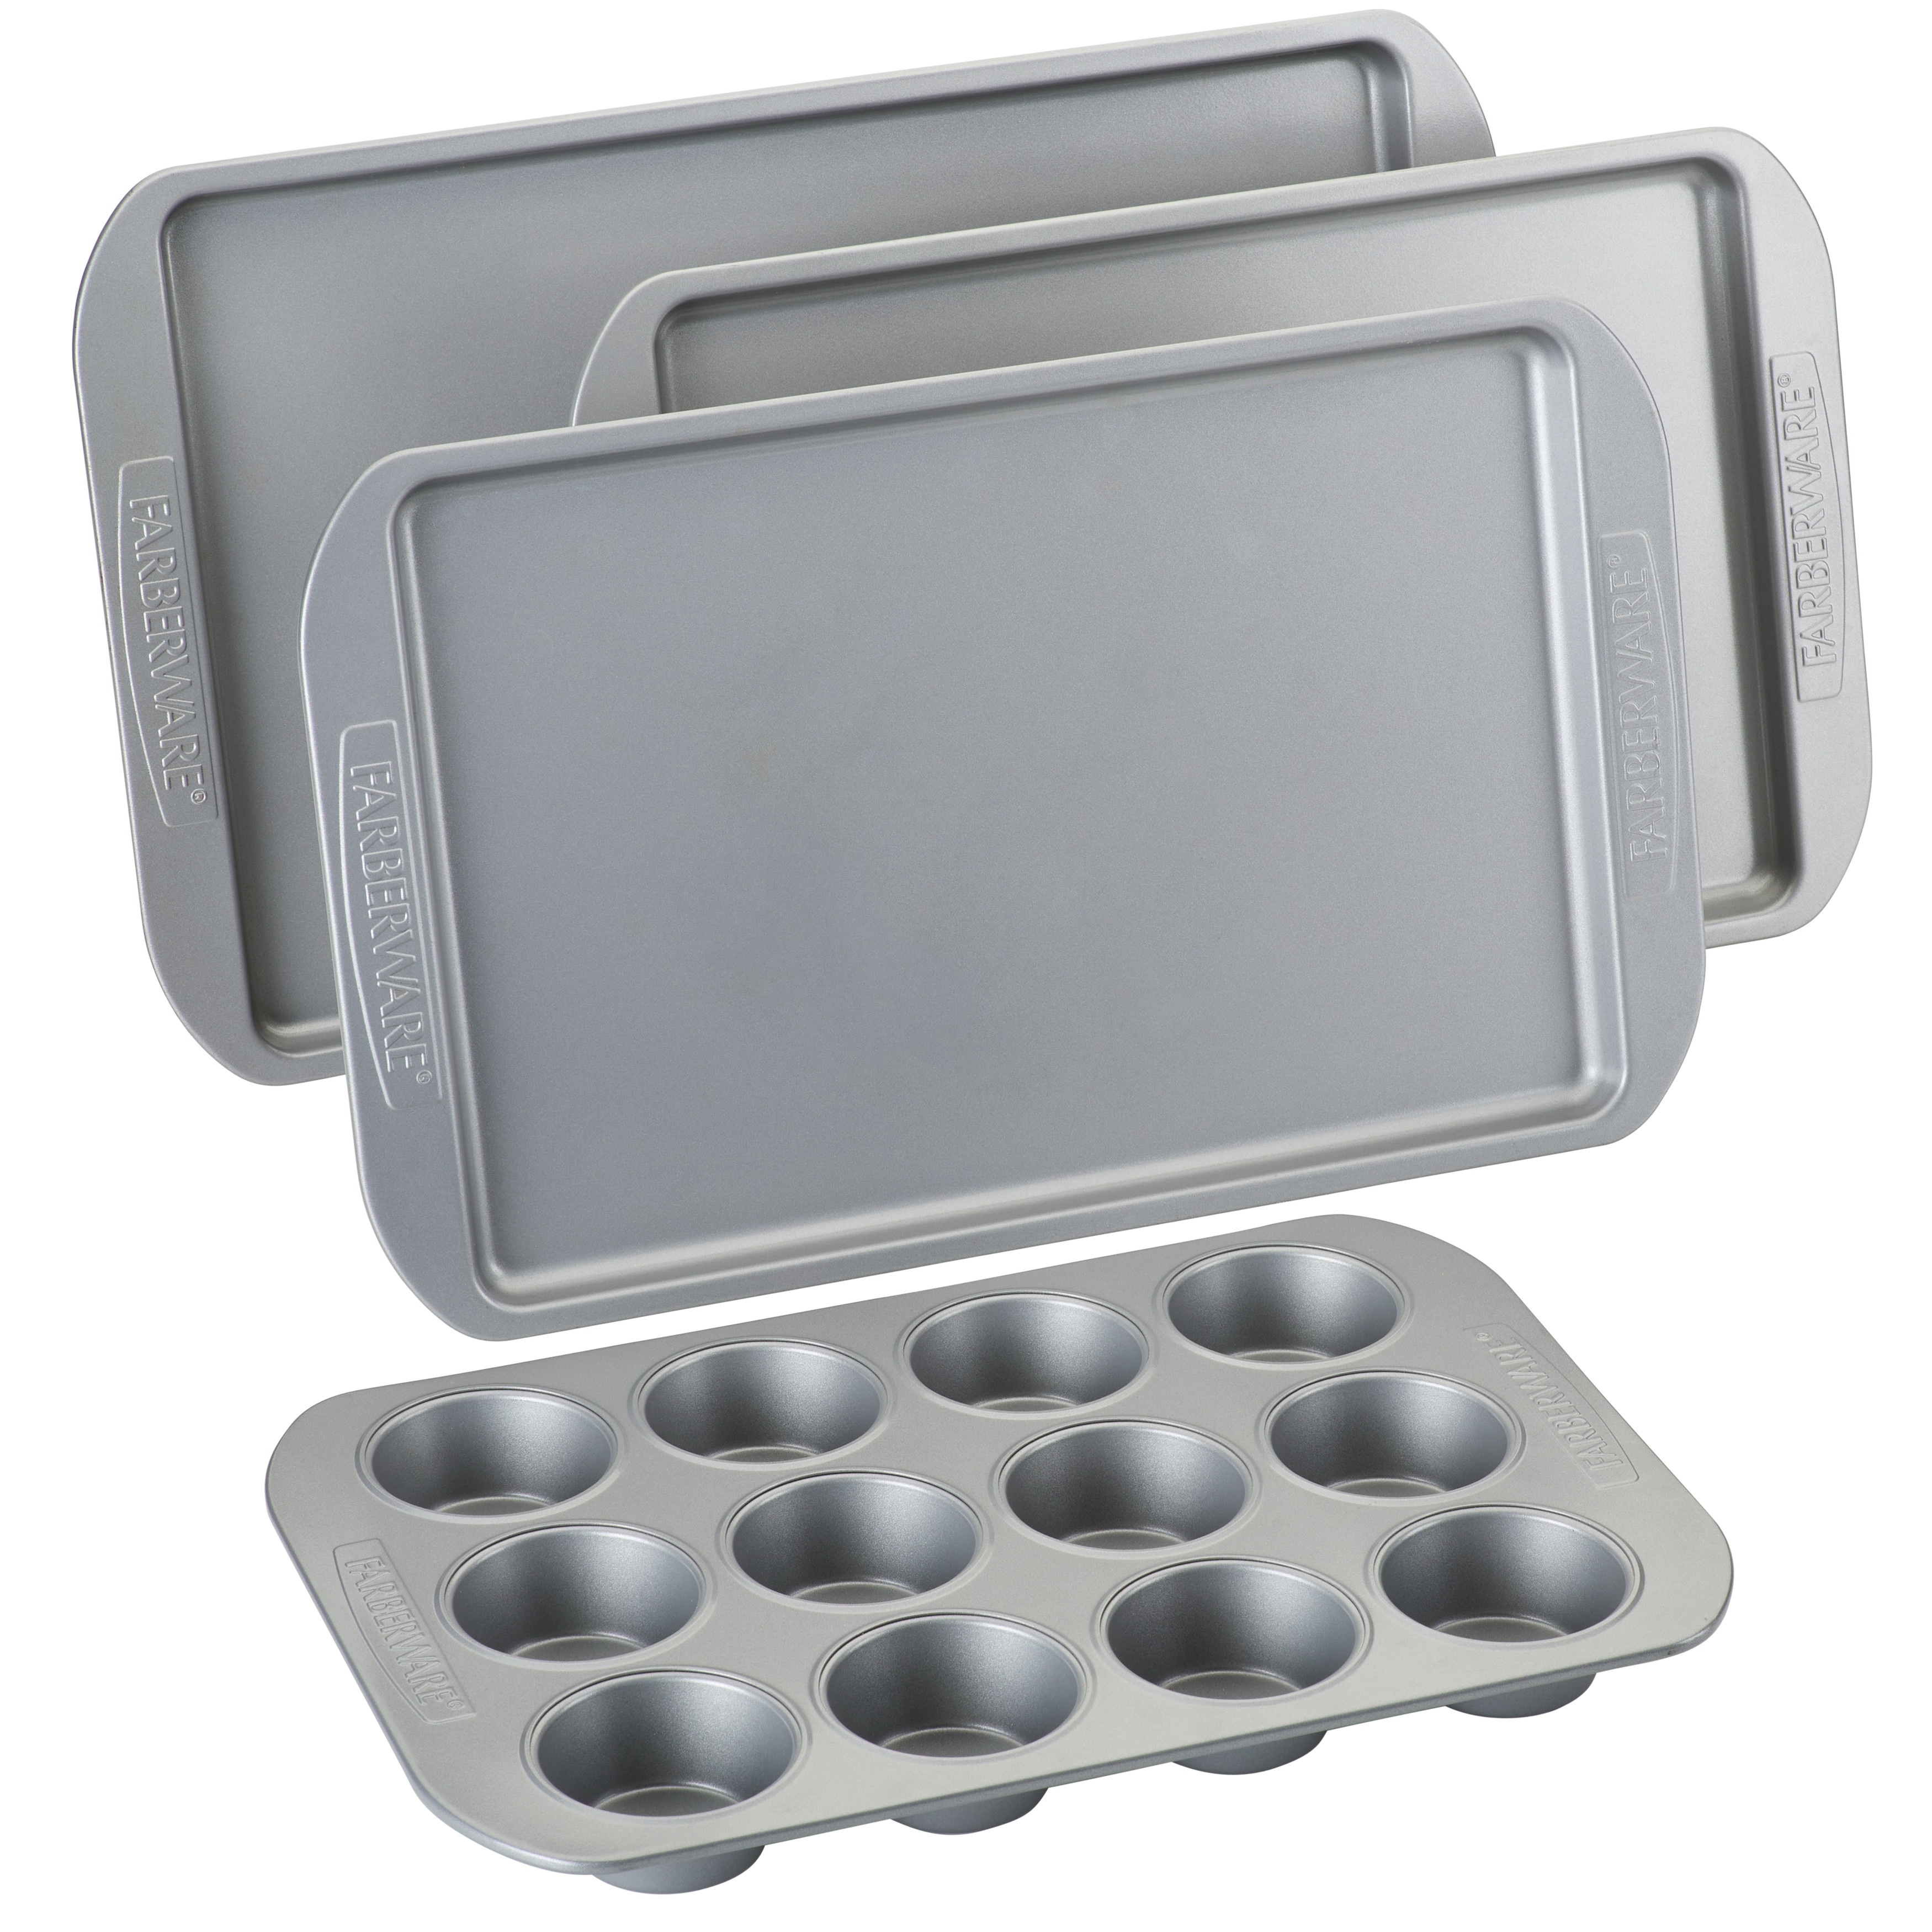 https://ak1.ostkcdn.com/images/products/is/images/direct/54a8aa1cc48b76c4cd63c072039f766997d8ba02/Farberware-Nonstick-Bakeware-Muffin-Cupcake-and-Sheet-Pan-Set-4-Piece.jpg